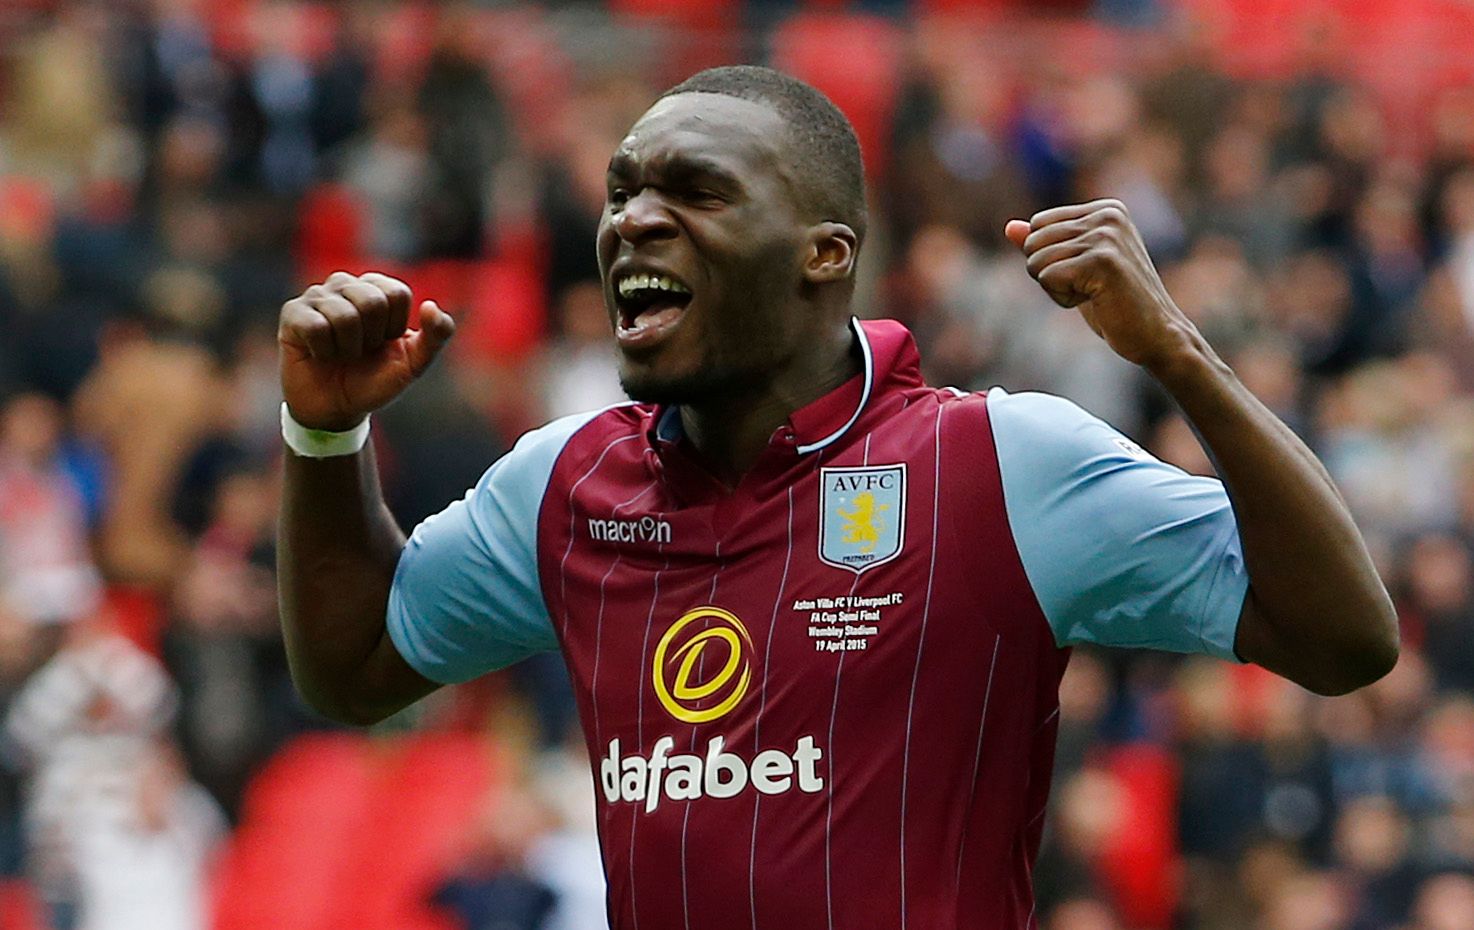 Football - Aston Villa v Liverpool - FA Cup Semi Final - Wembley Stadium - 19/4/15 
Aston Villa's Christian Benteke celebrates at the end of the match 
Action Images via Reuters / John Sibley 
Livepic 
EDITORIAL USE ONLY. No use with unauthorized audio, video, data, fixture lists, club/league logos or 